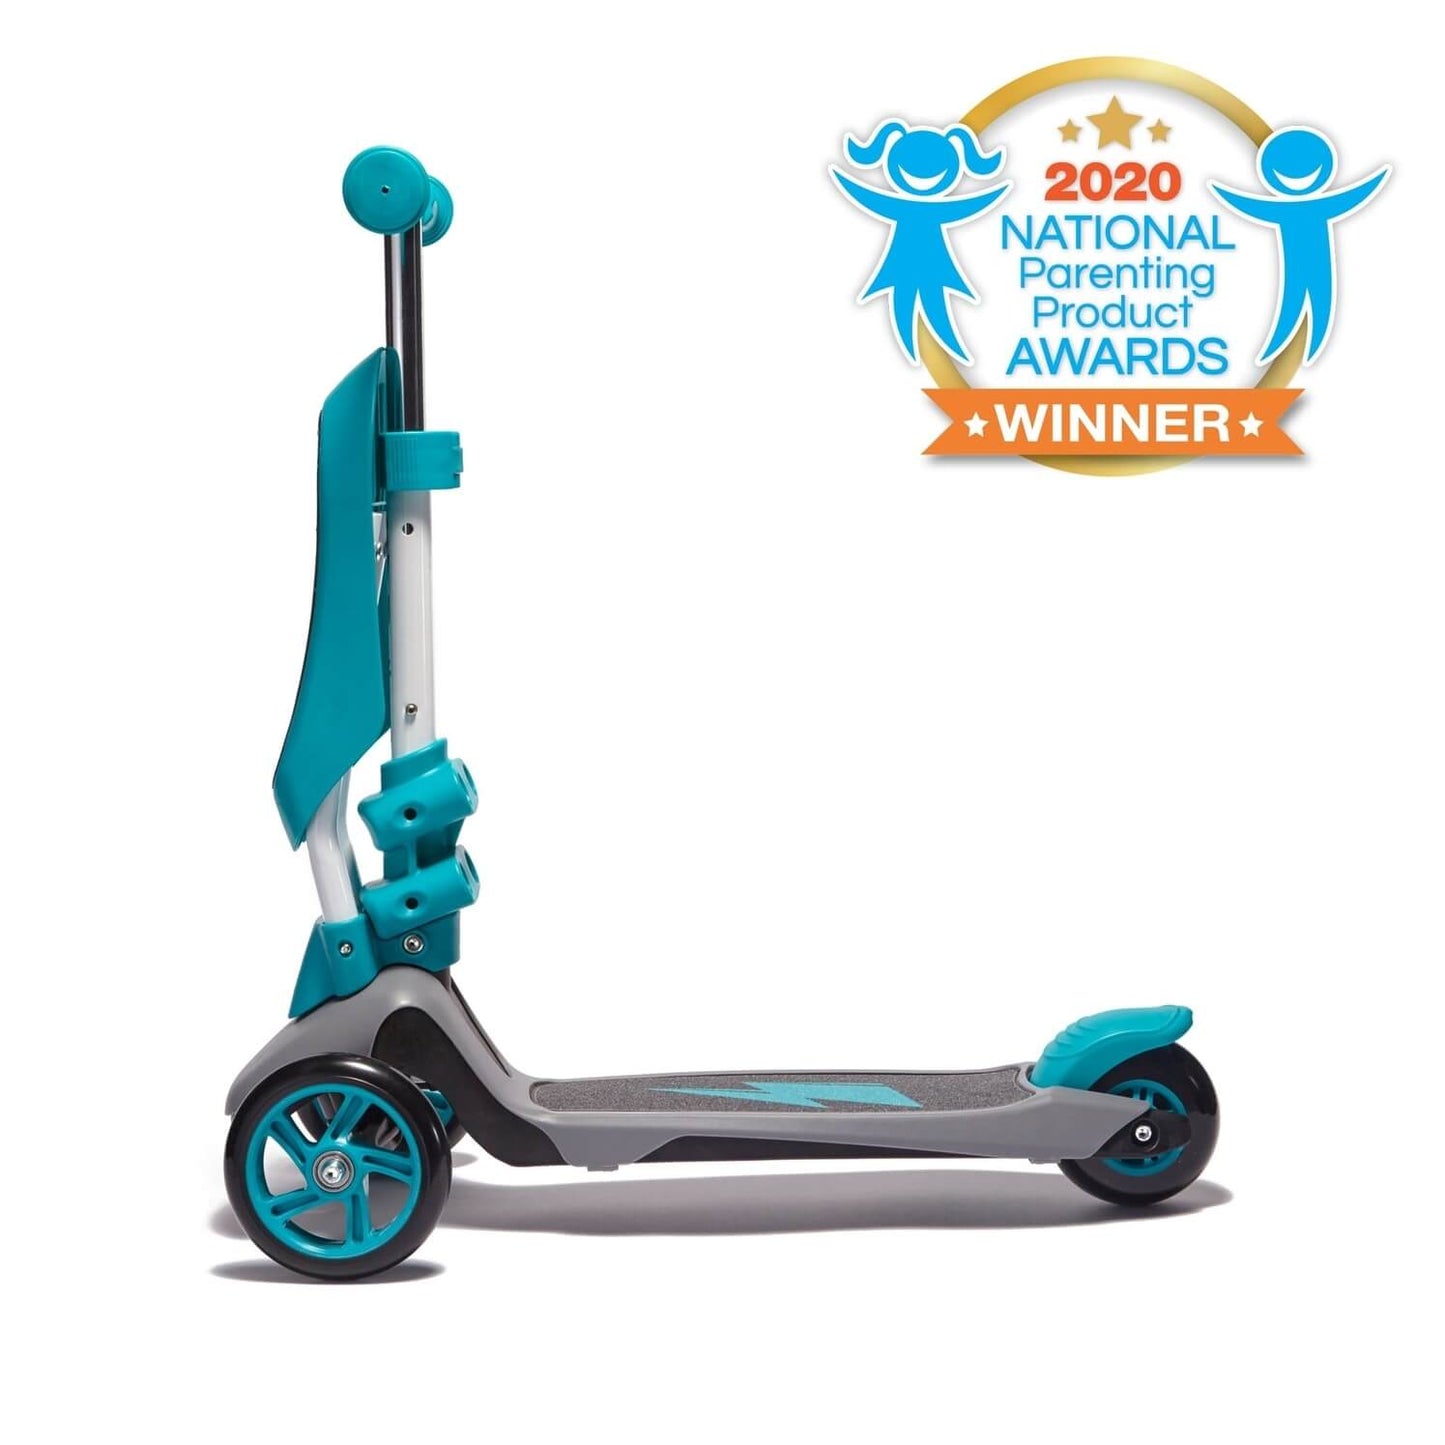 SVOLTA "Ace" and Convertible Scooter - Teal